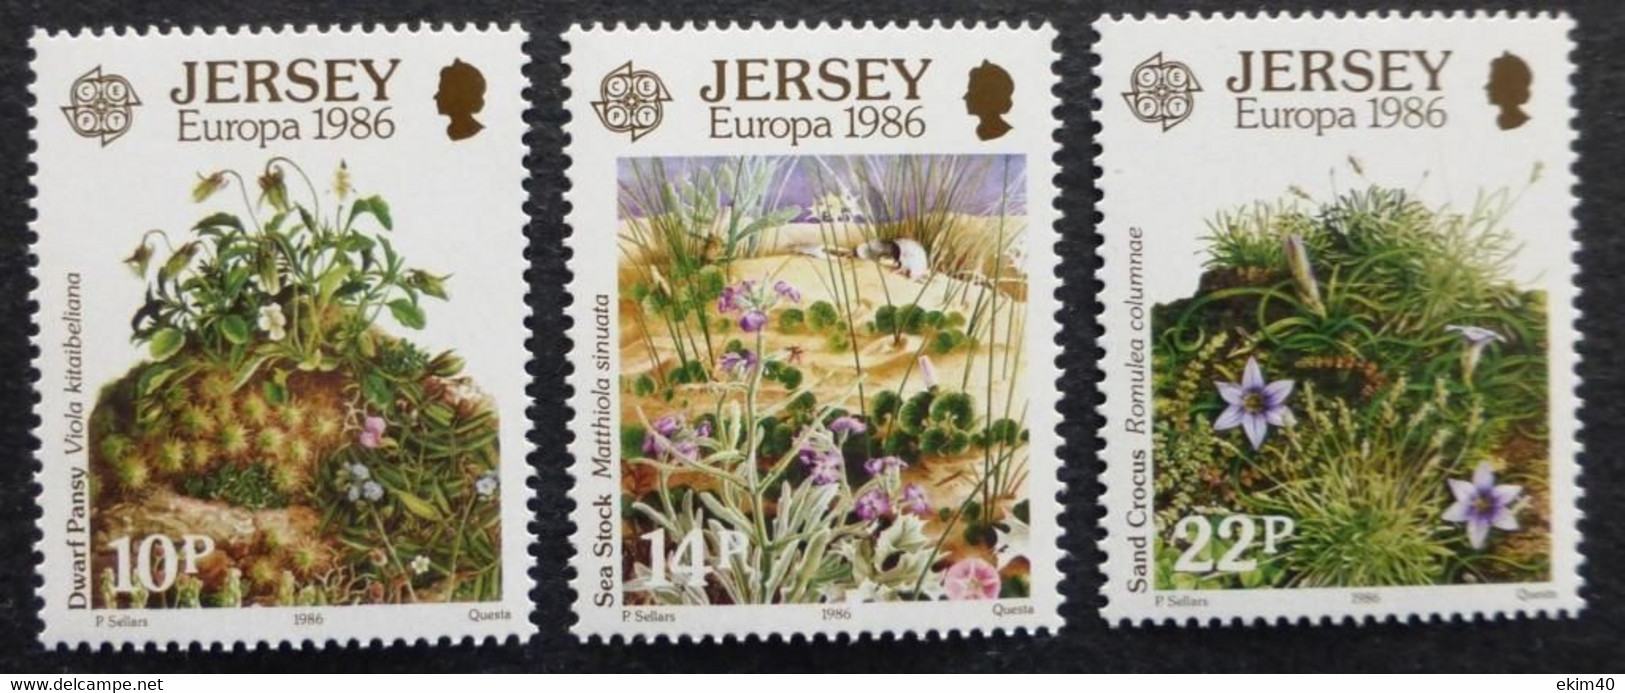 1986 Set Of Mint/MNH Stamps From Jersey Conservation SG 386-8  No DC-1241 - Jersey